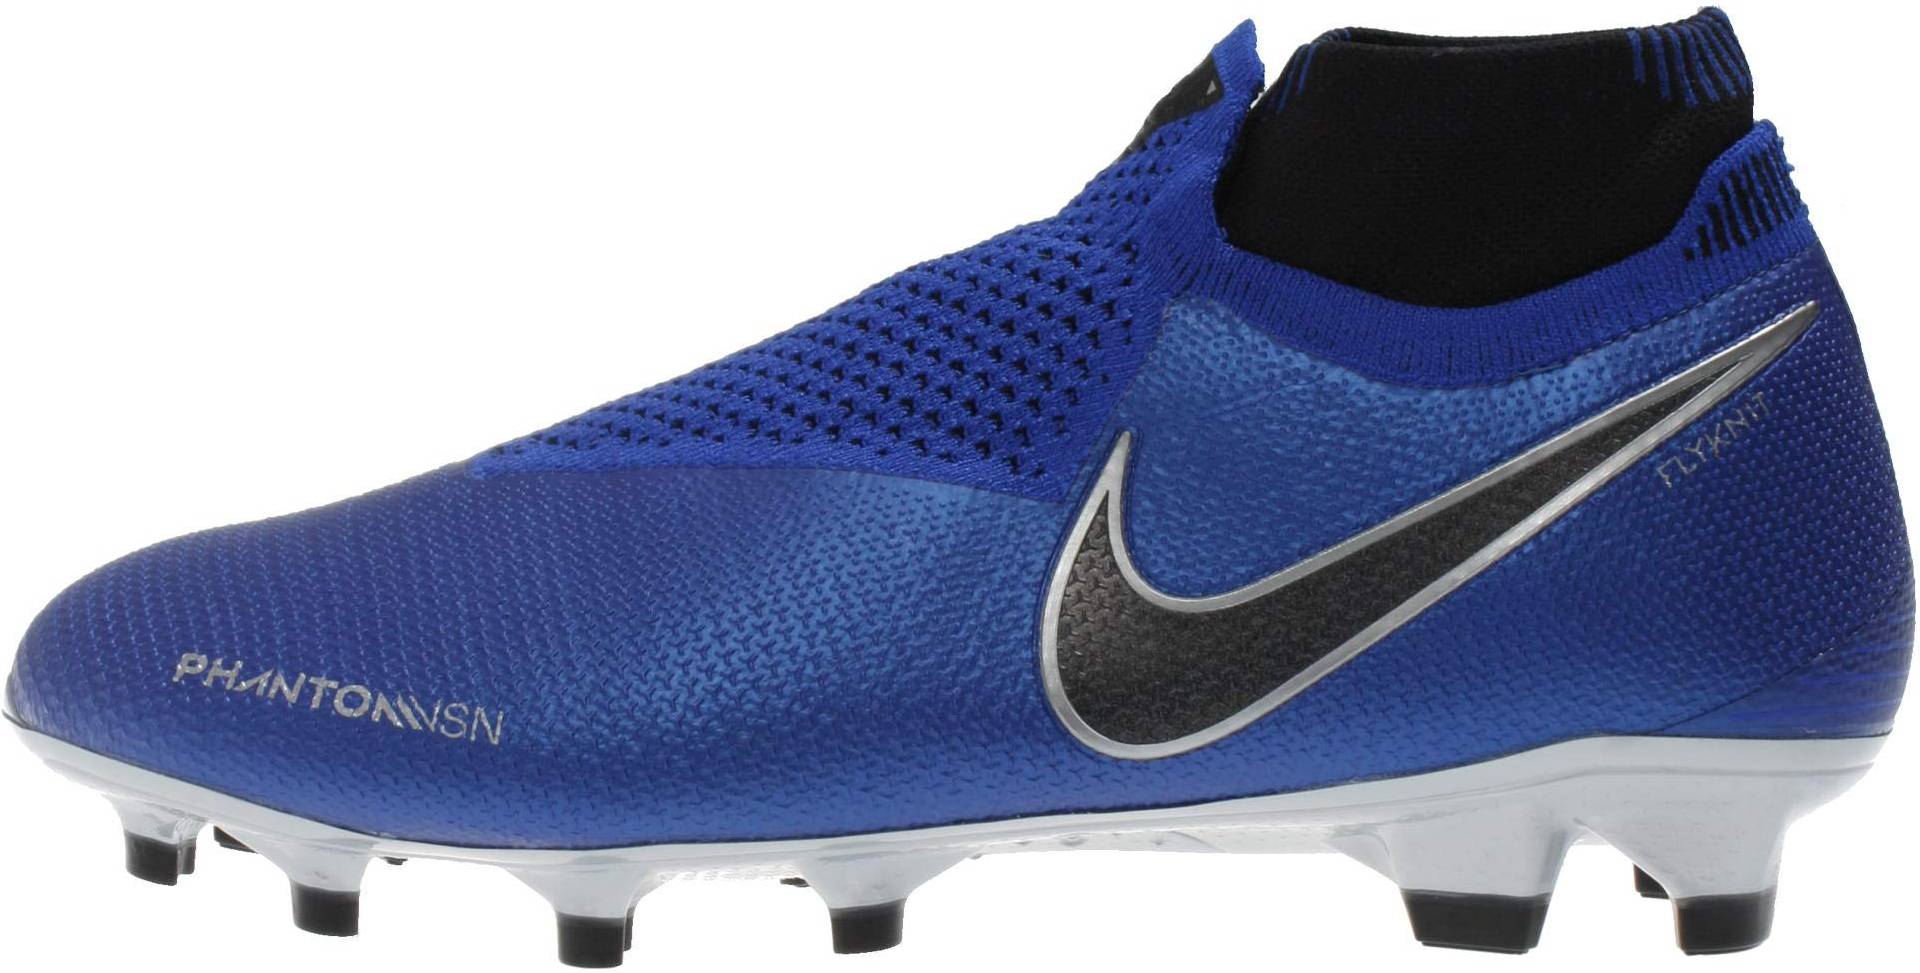 ghost nike cleats